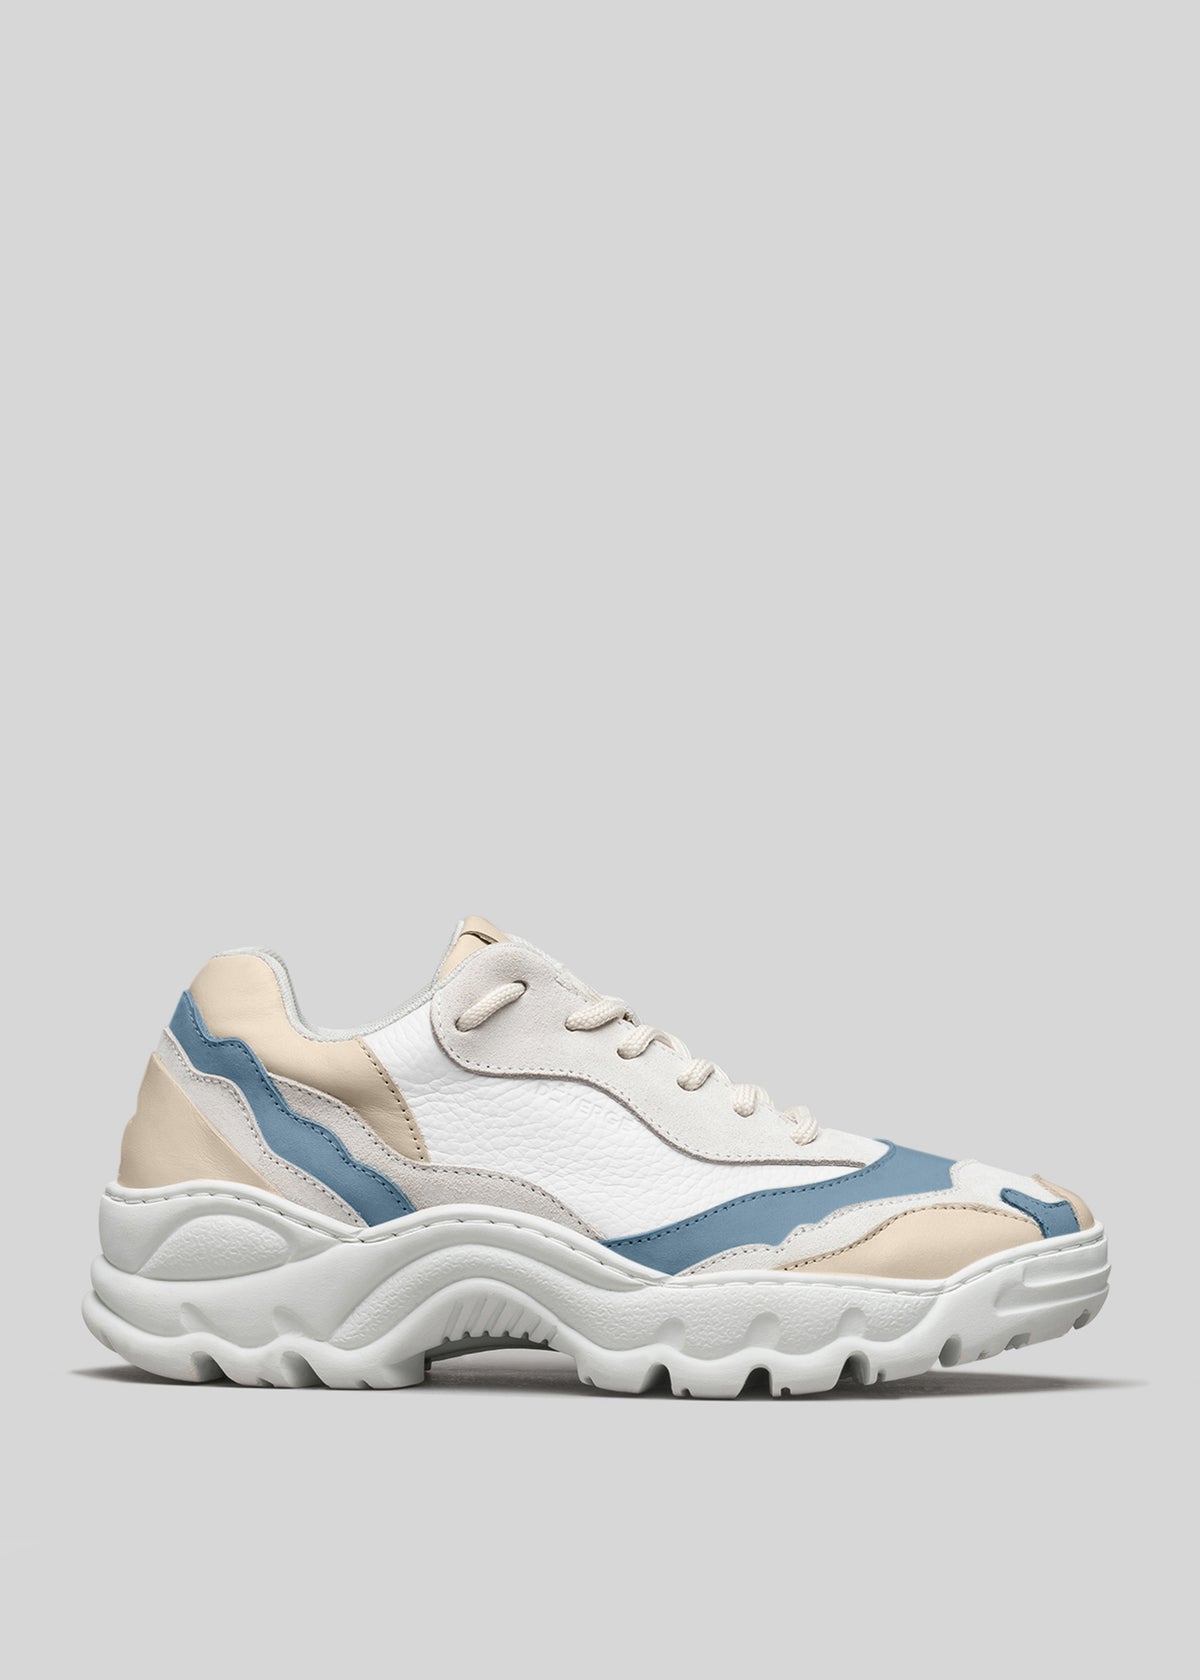 White, blue, and beige L0009 MAYATHE low top sneaker with a chunky sole, displayed against a plain gray background.